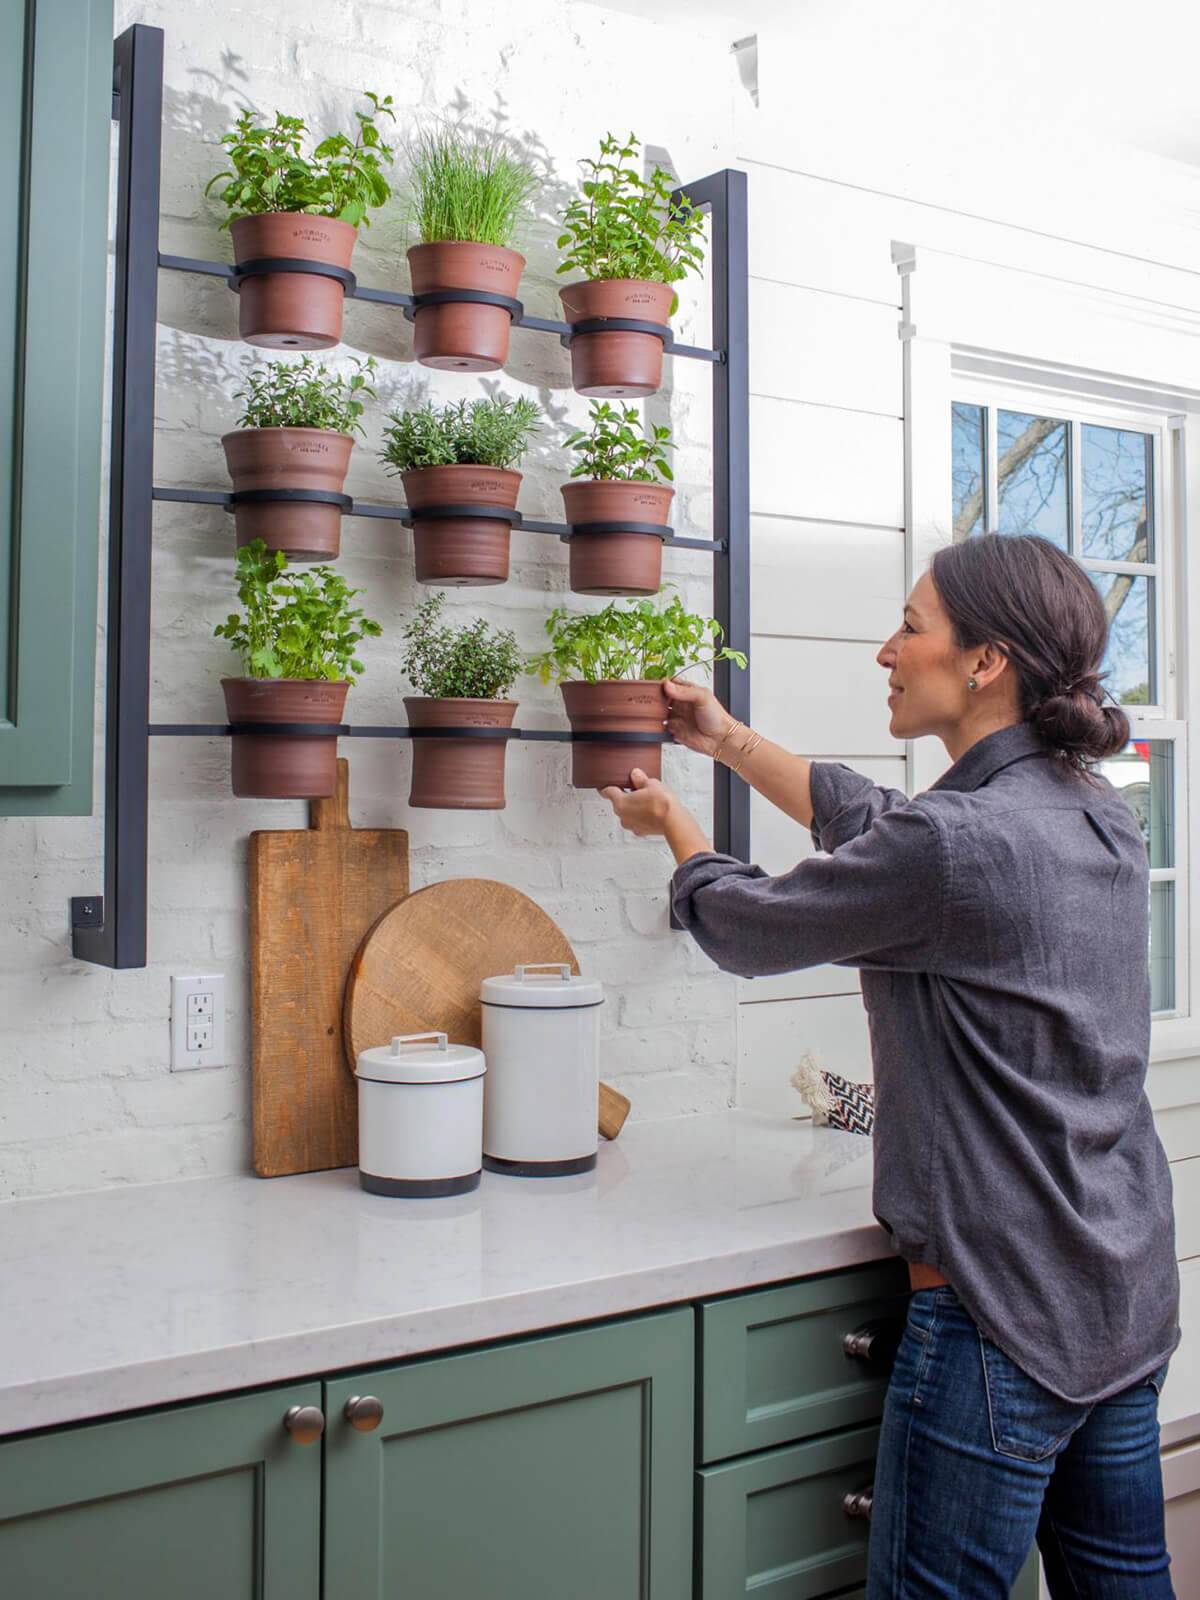 Indoor Herb Planter Ideas Place